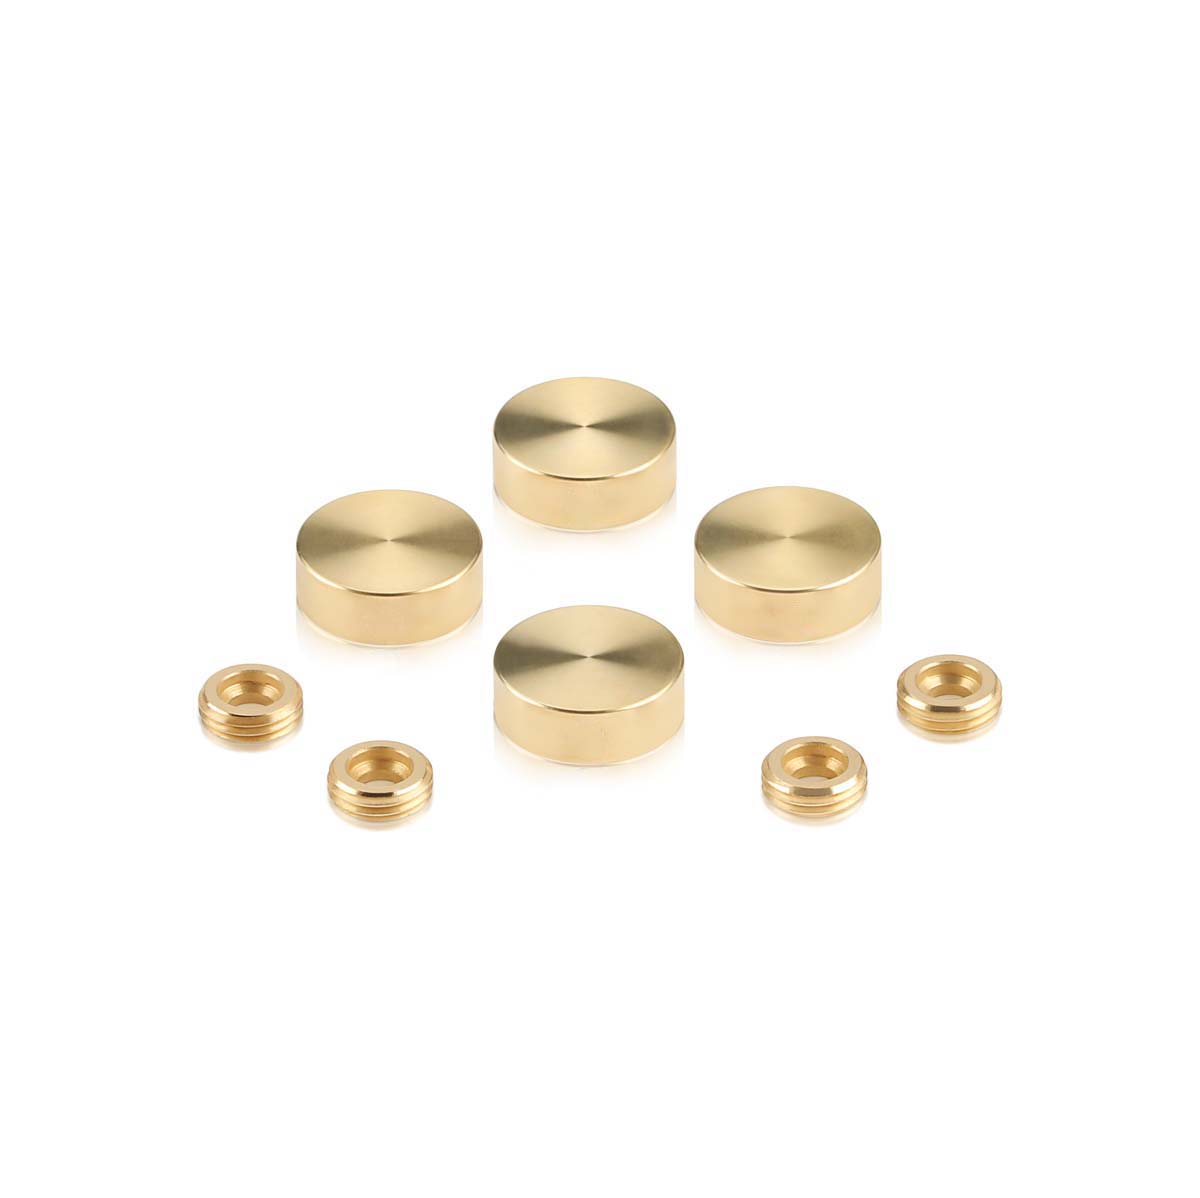 Set of 4 Screw Cover, Diameter: 11/16'' (less 3/4''), Brass Plain Finish, (Indoor or Outdoor Use)